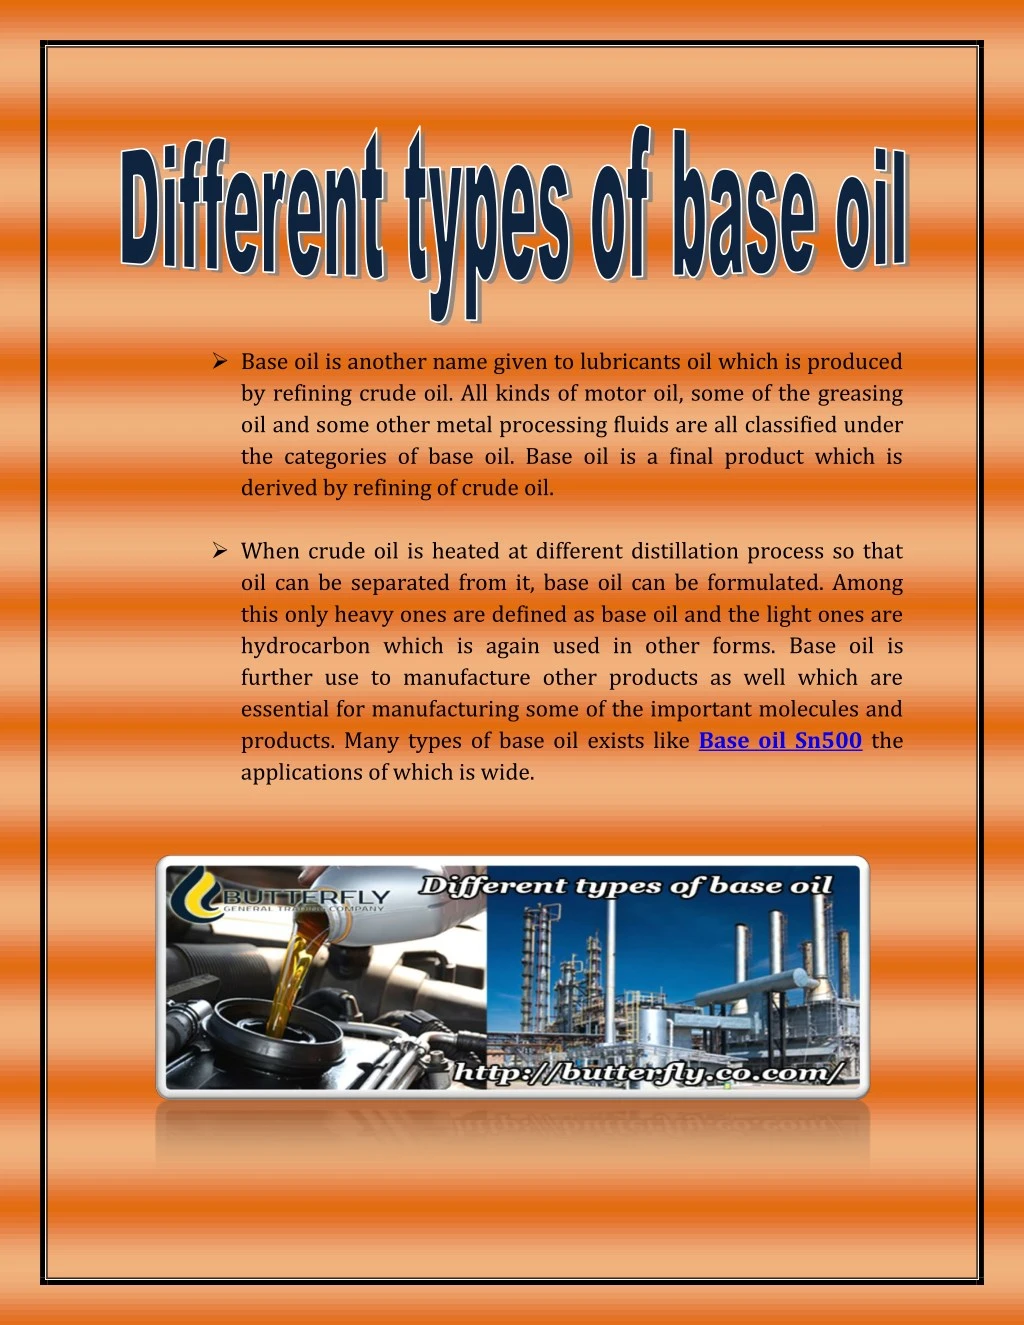 base oil is another name given to lubricants